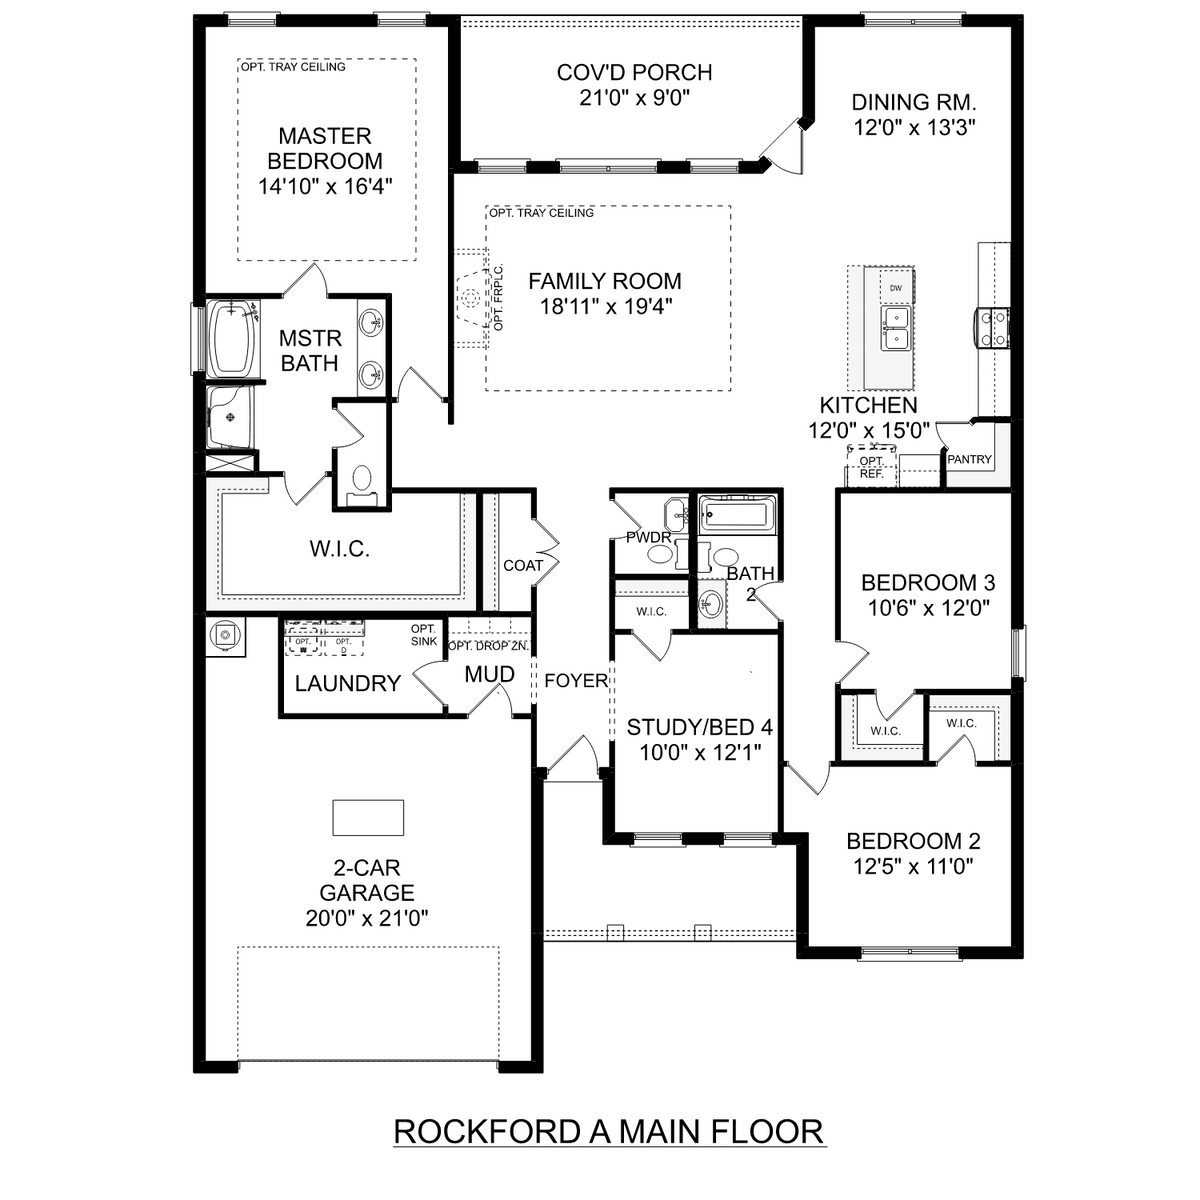 1 - The Rockford buildable floor plan layout in Davidson Homes' Cain Park community.